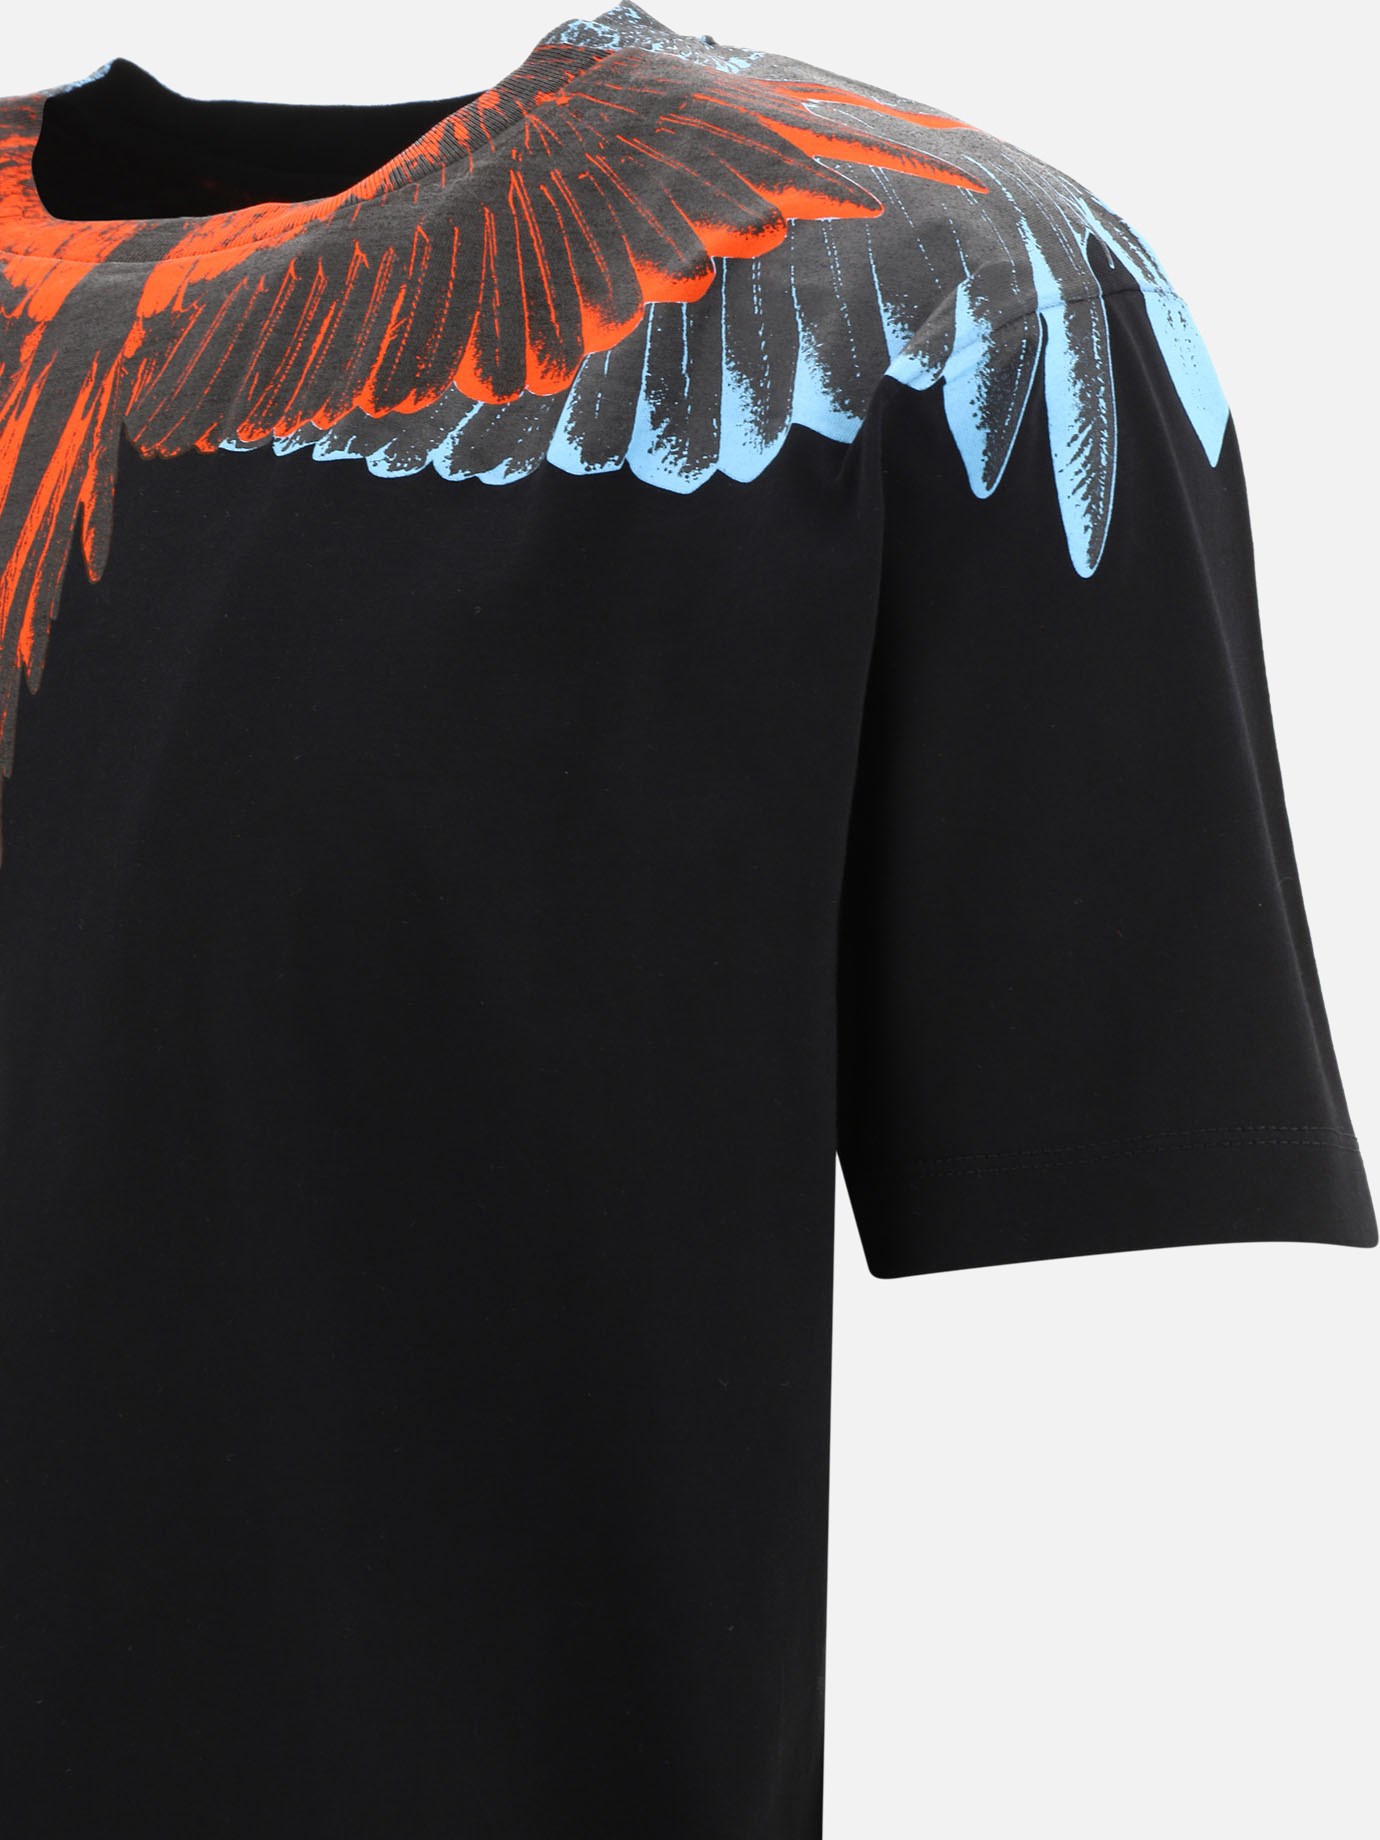 T-shirt  Icon Wings  by Marcelo Burlon County of Milan